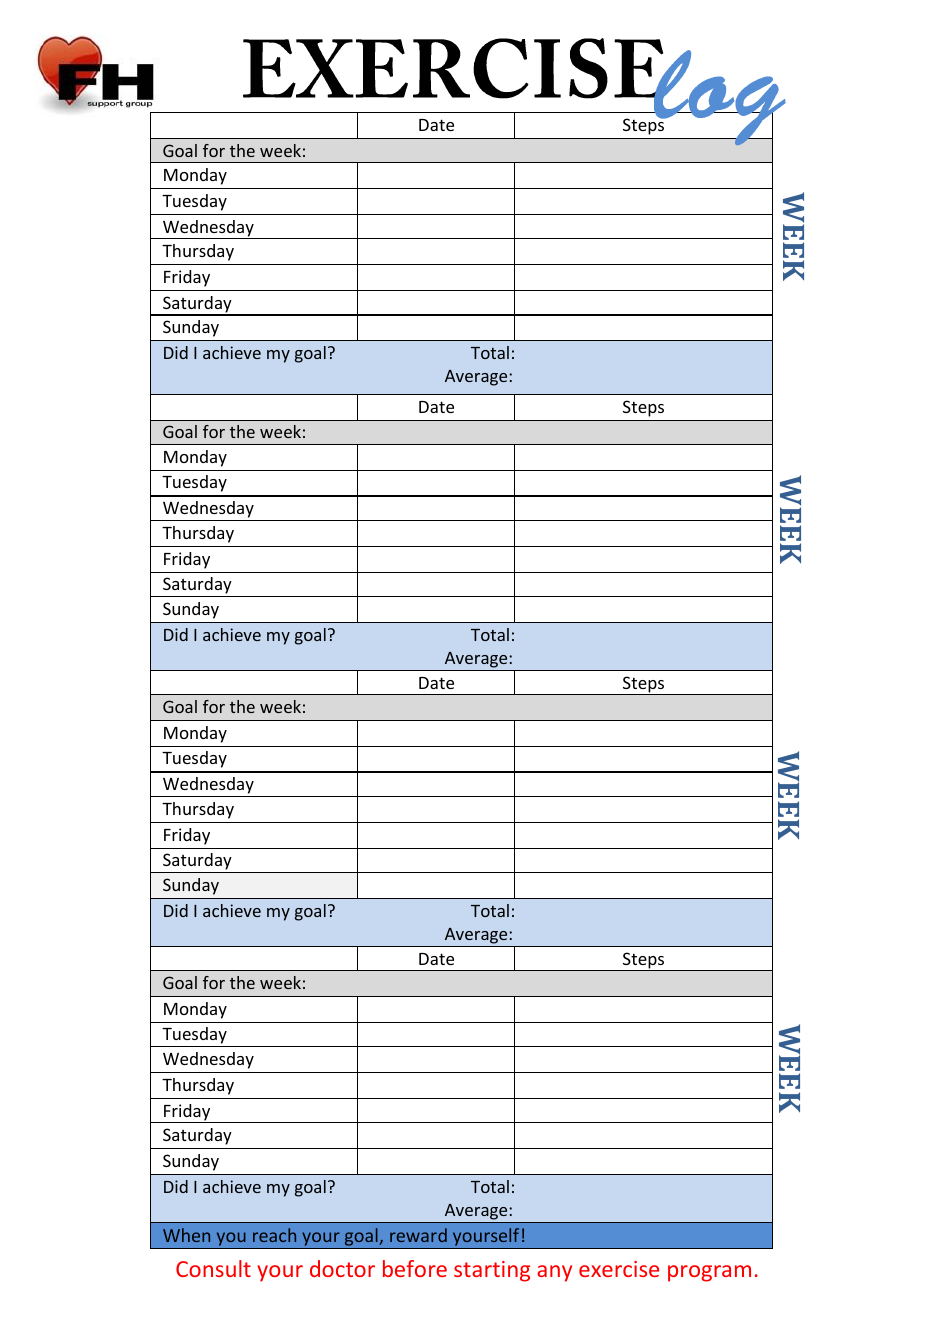 Monthly Exercise Log Template - Fh Support Group